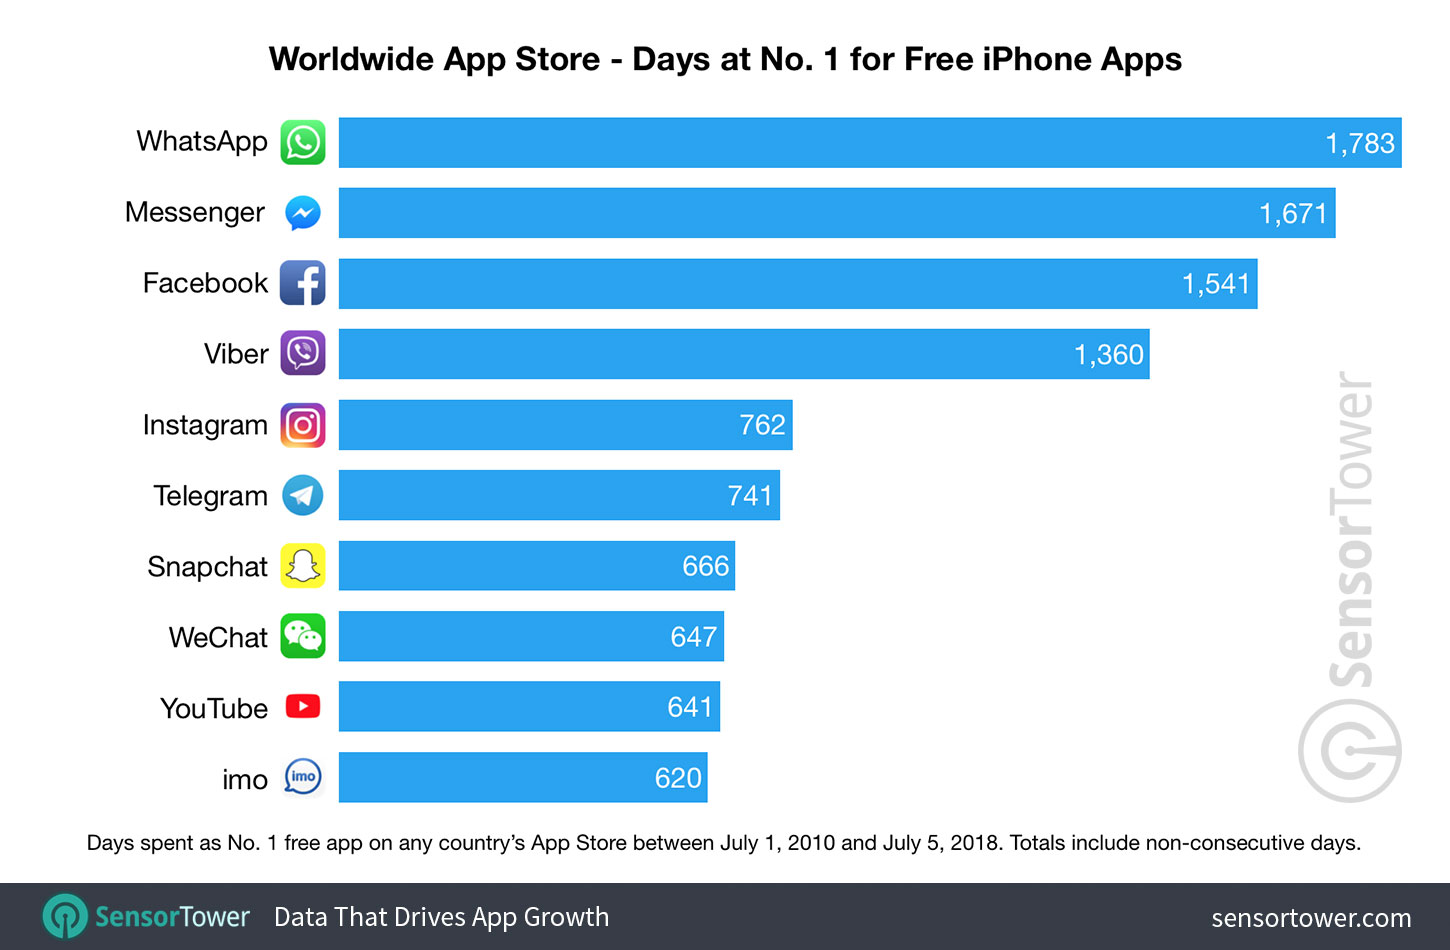 Chart showing a ranking of apps by number of days spent as No. 1 free iPhone app on the Worldwide App Store